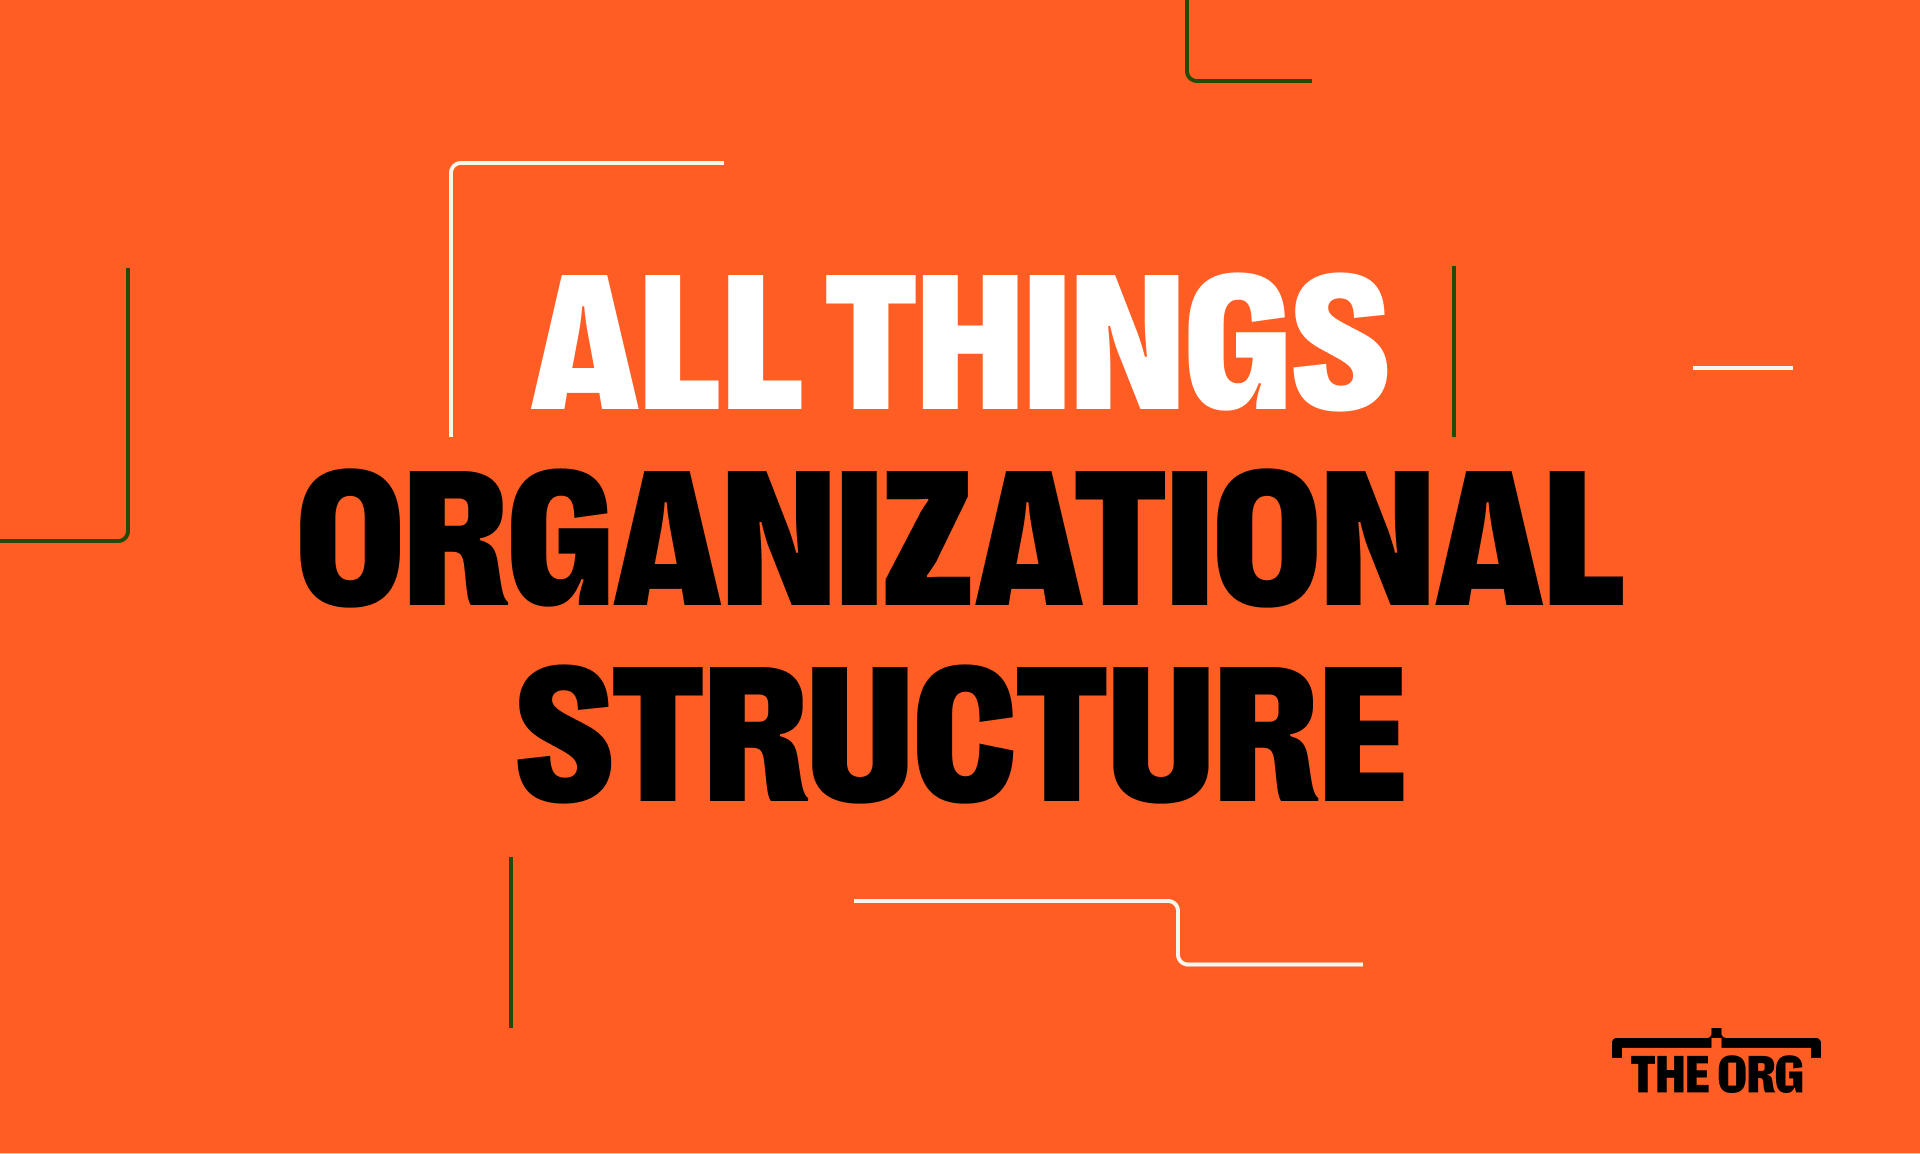 The Ultimate Guide to Company Structure Charts